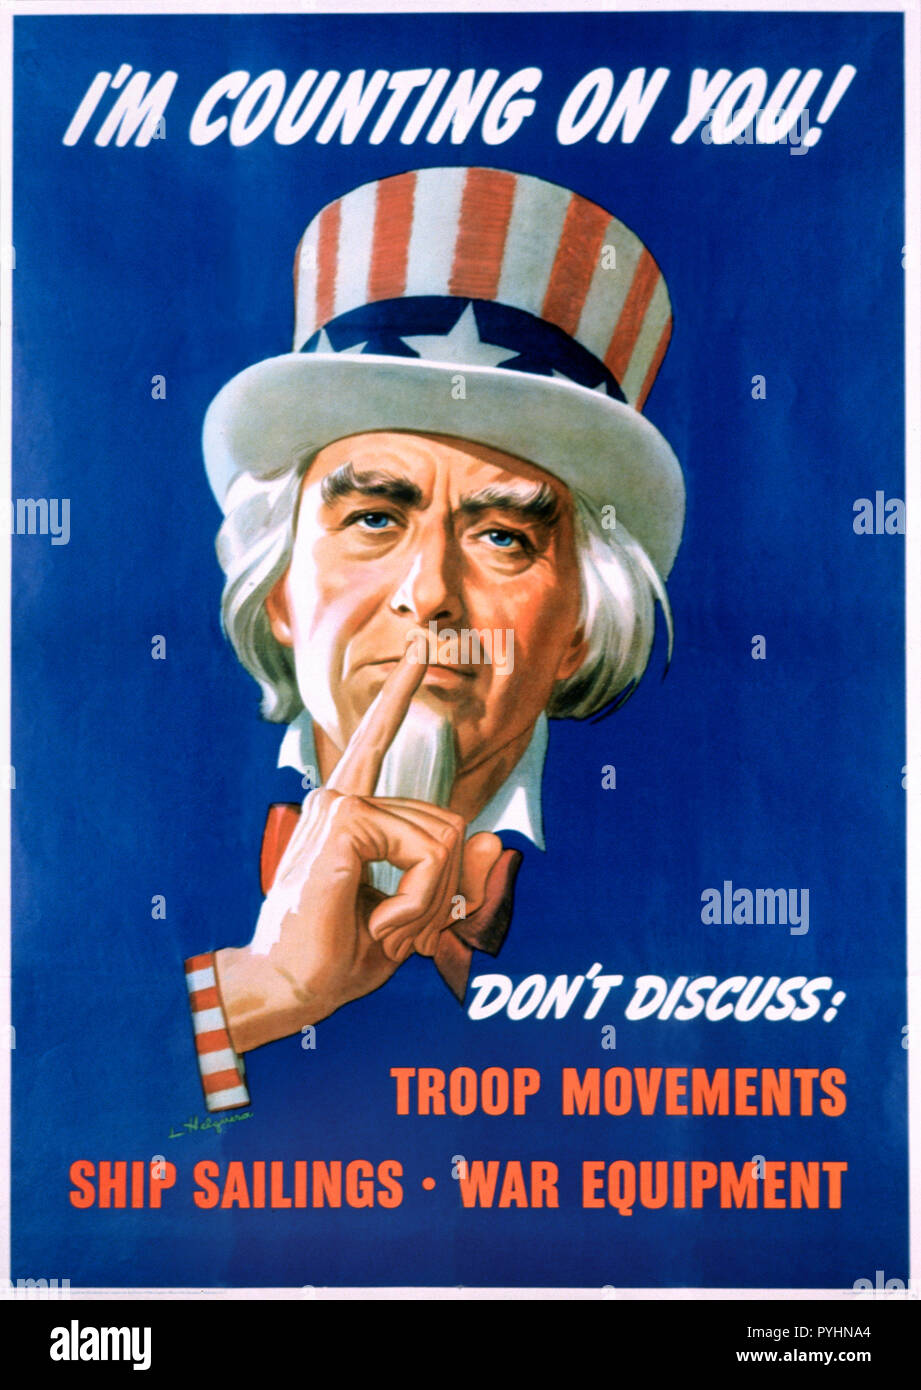 1943 --- <I'm Counting on You!> Poster by Leon Helguera --- Image by © K.J. Historical/CORBIS Stock Photo